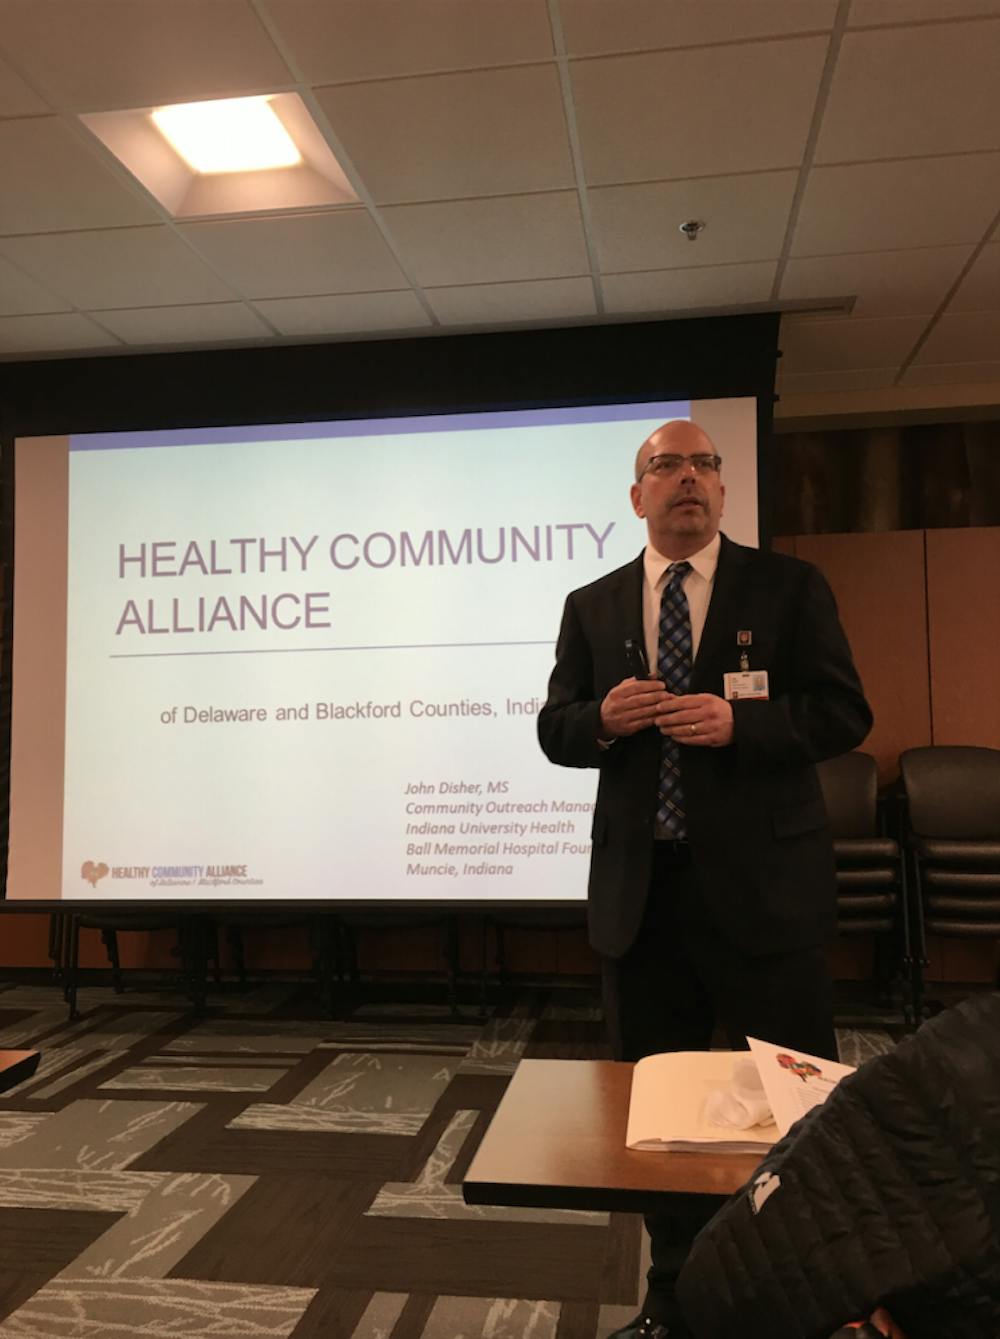 Ball State is one of 37 stakeholders in the Healthy Community Alliance of Delaware and Blackford counties. John Disher, community outreach&nbsp;manager&nbsp;for IU Health Ball Memorial&nbsp;Hospital, plans for the impact model to align with existing initiatives and a&nbsp;catalyst.&nbsp;DN PHOTO MICHELLE KAUFMAN